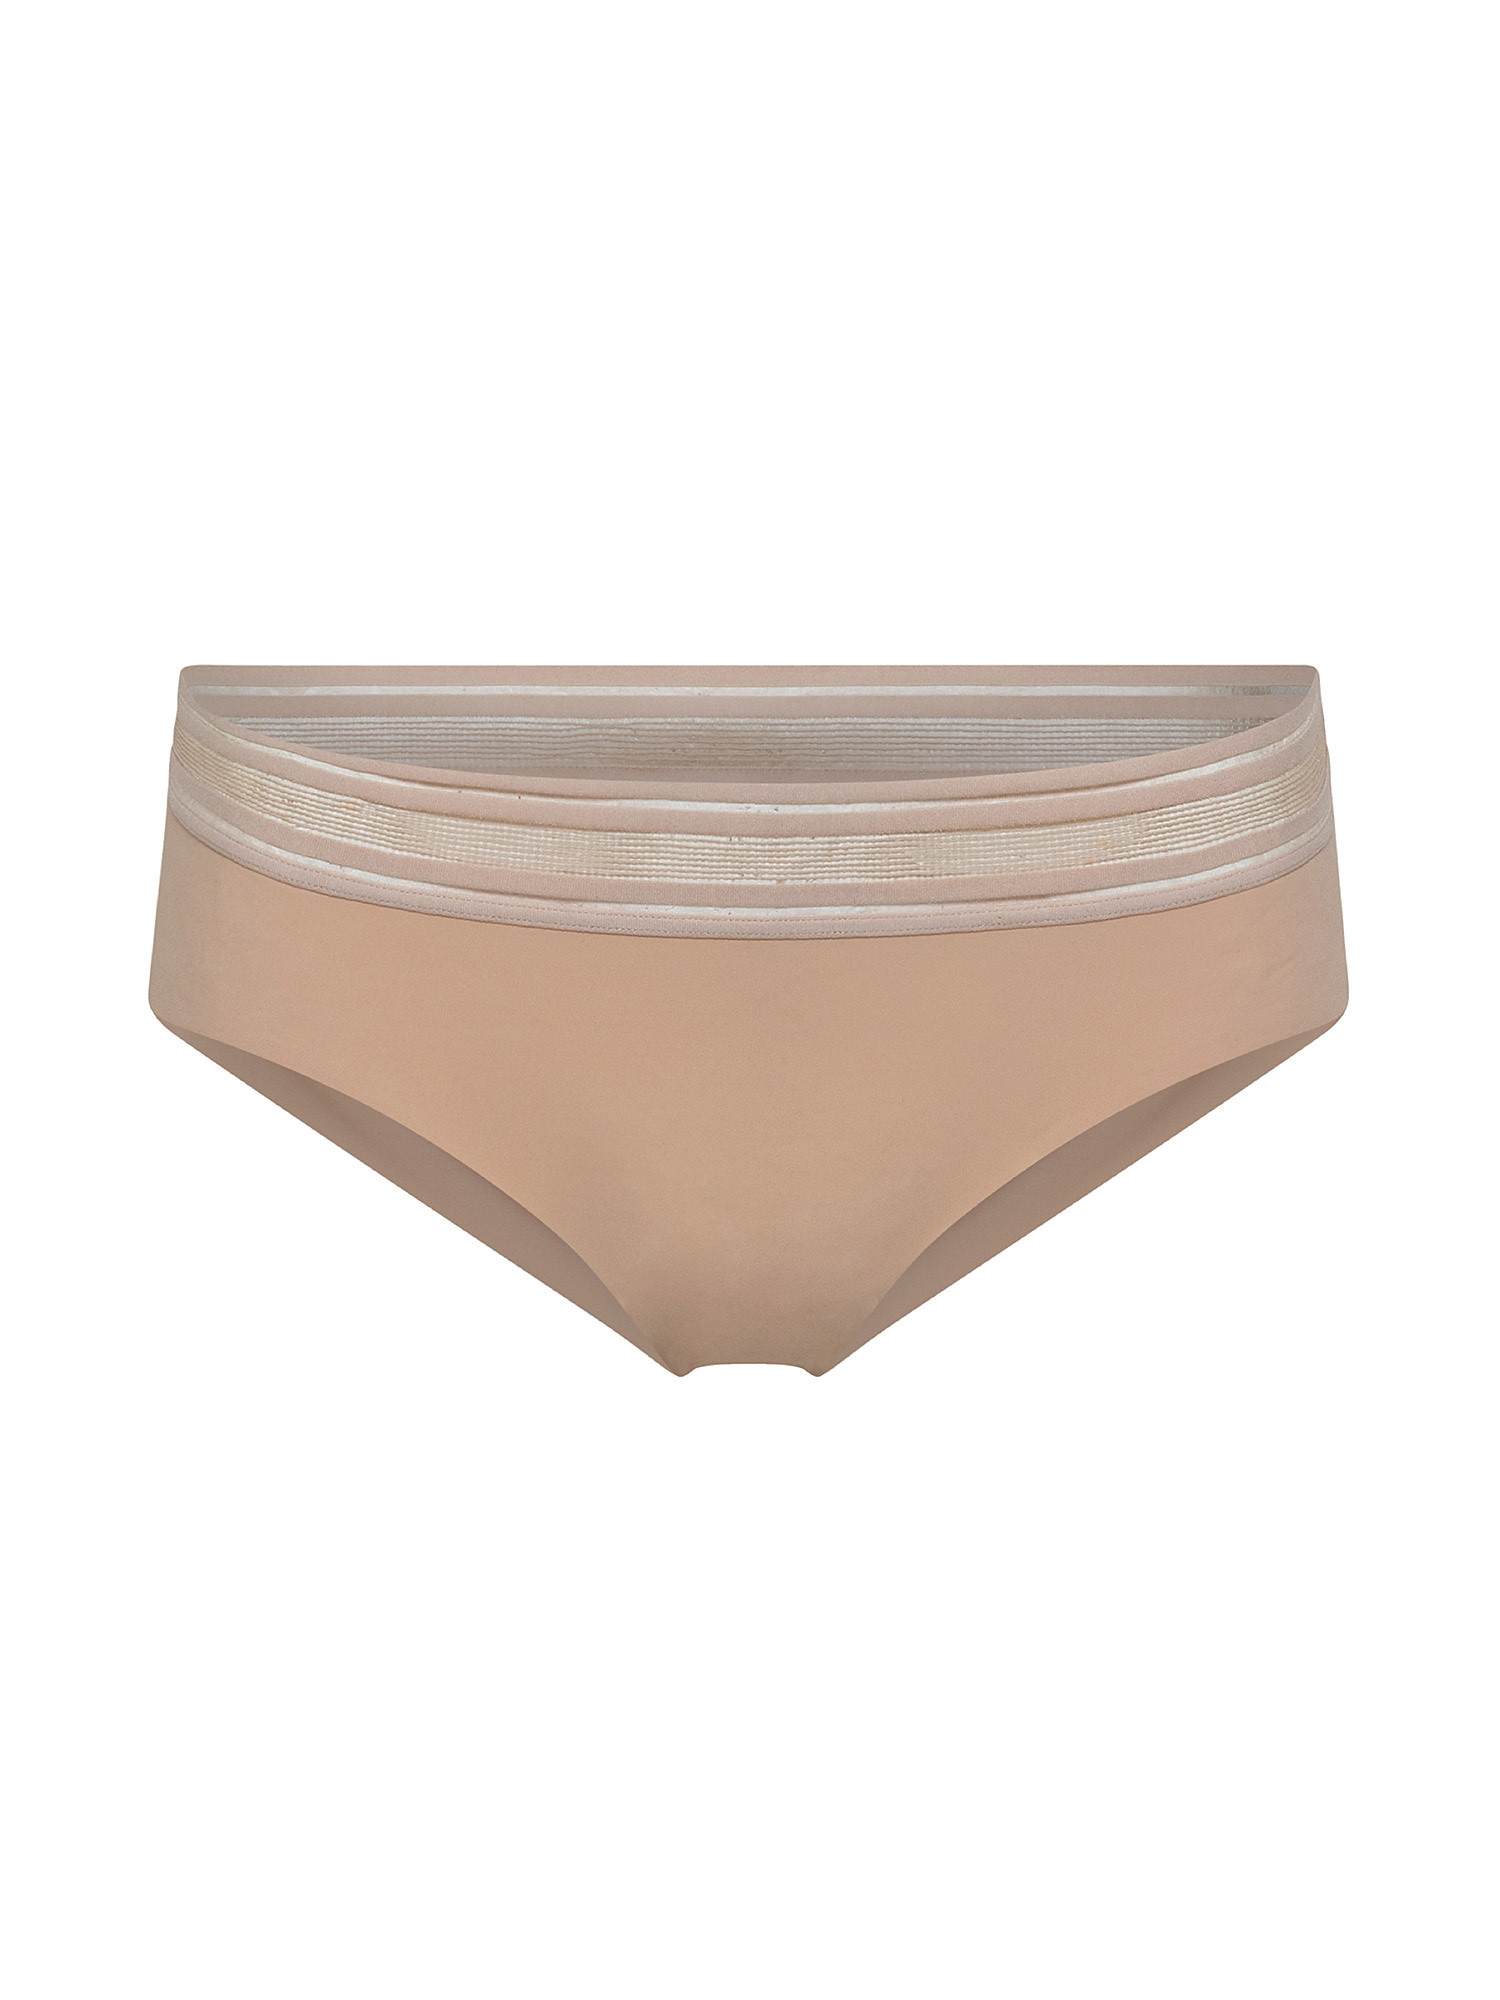 Briefs with graphic elastic band, Sand, large image number 0